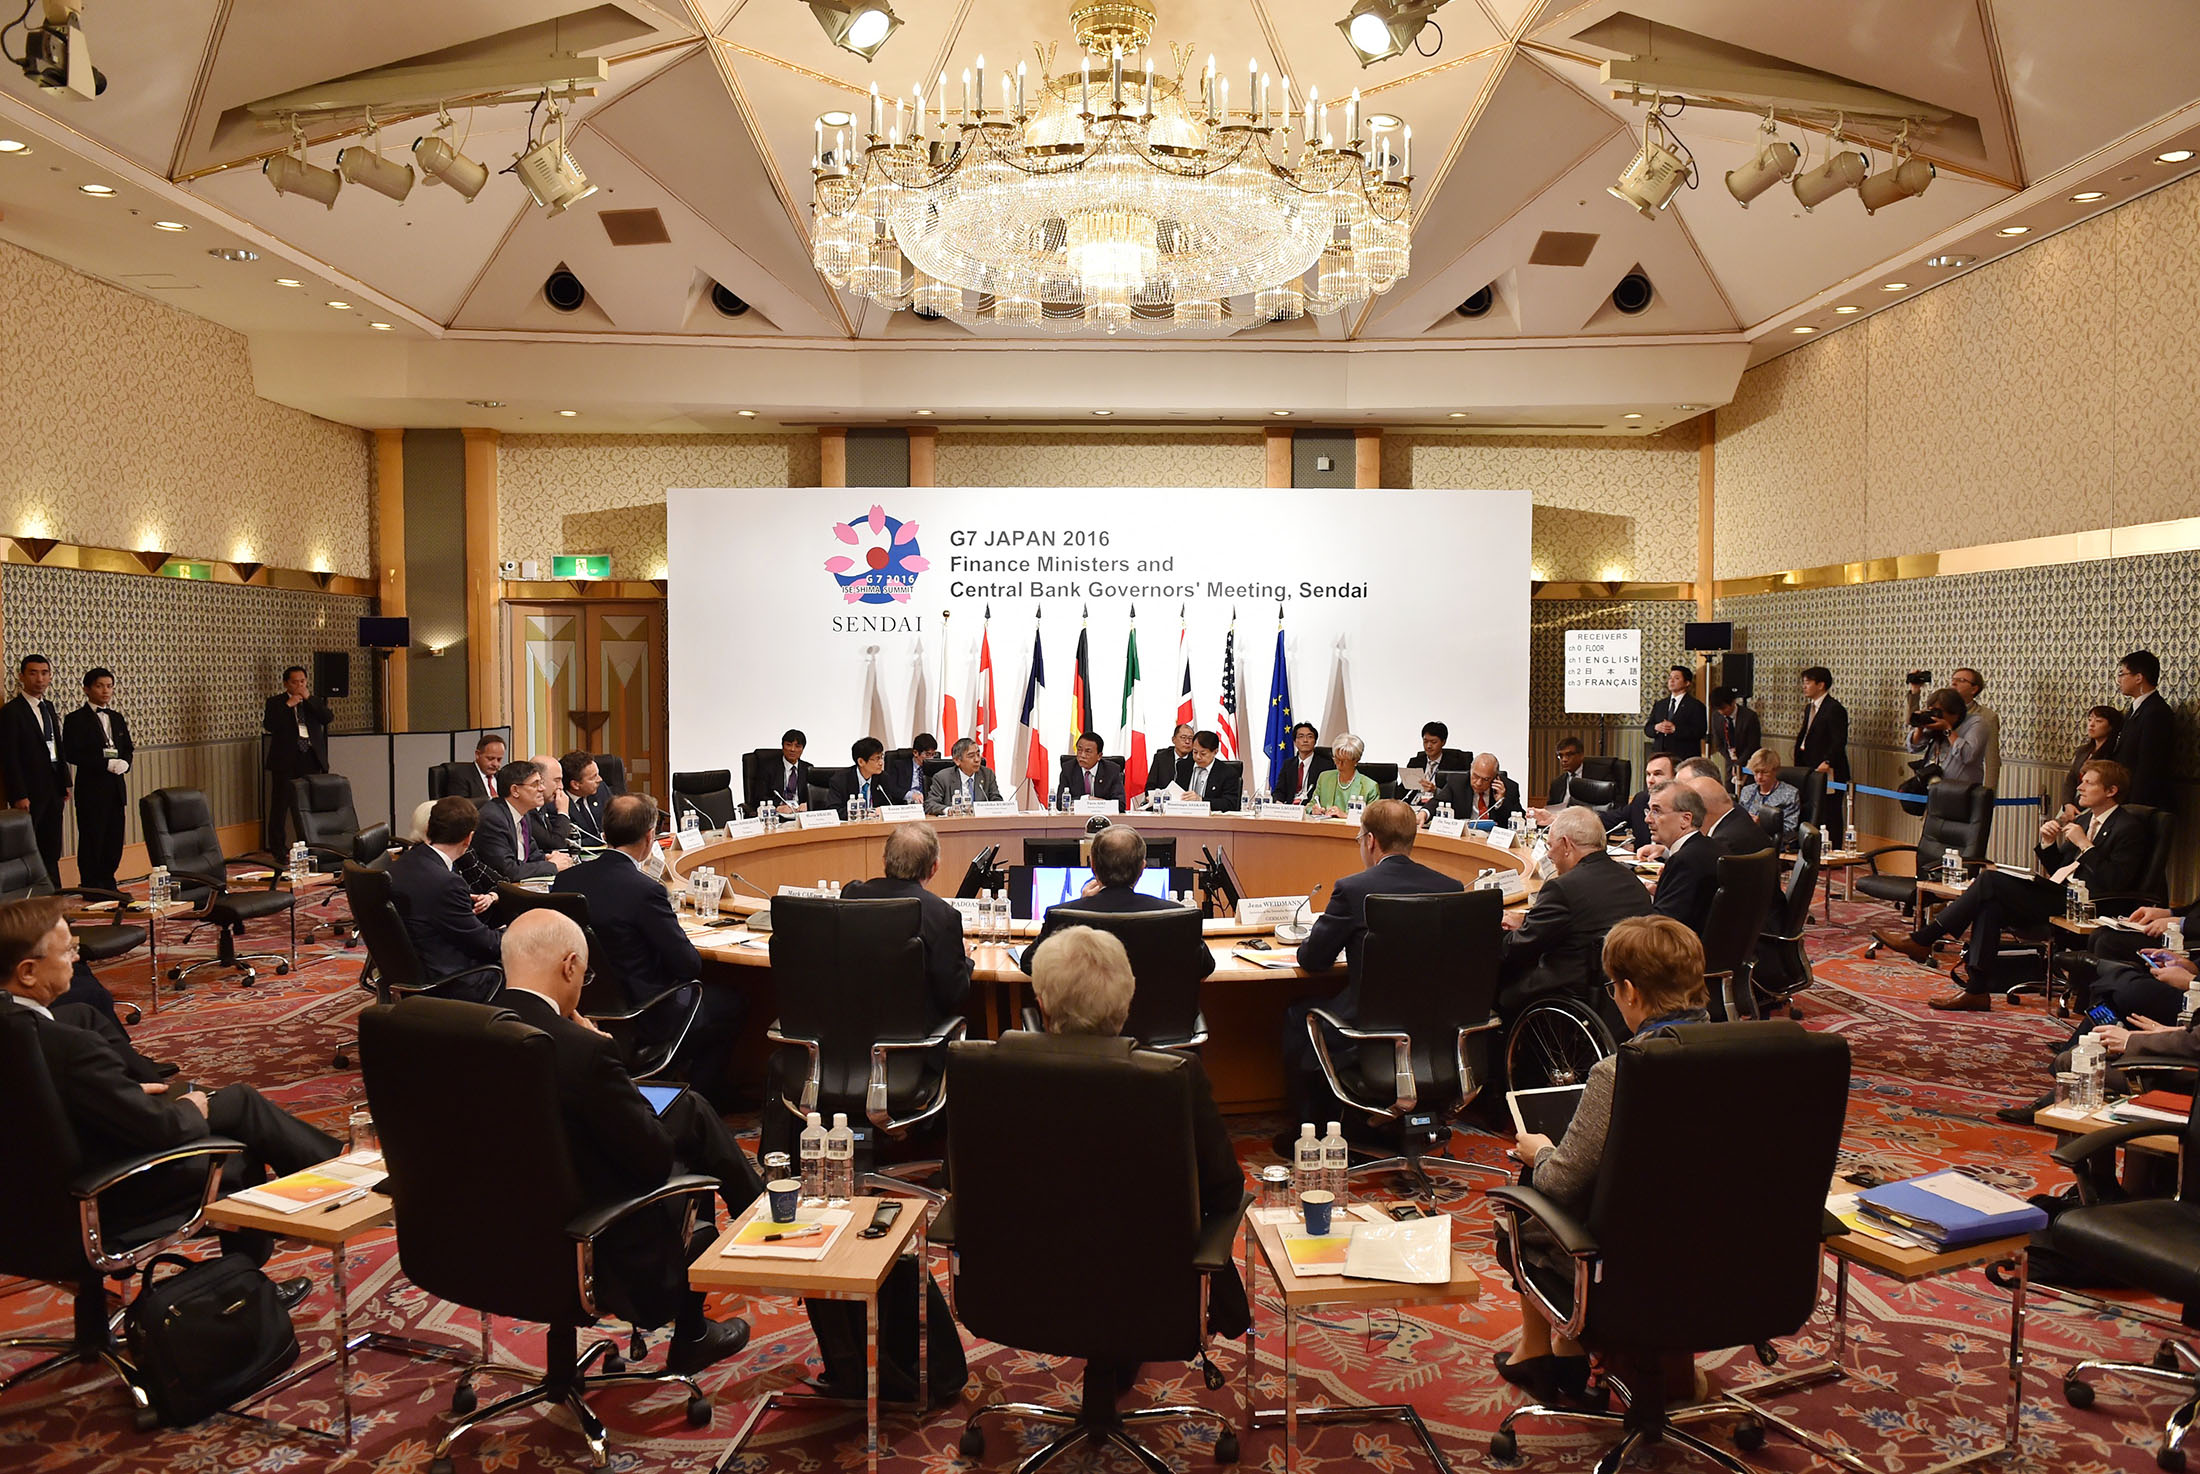 Finance ministers and central bankers from the G7 hold a session meeting in Sendai.
